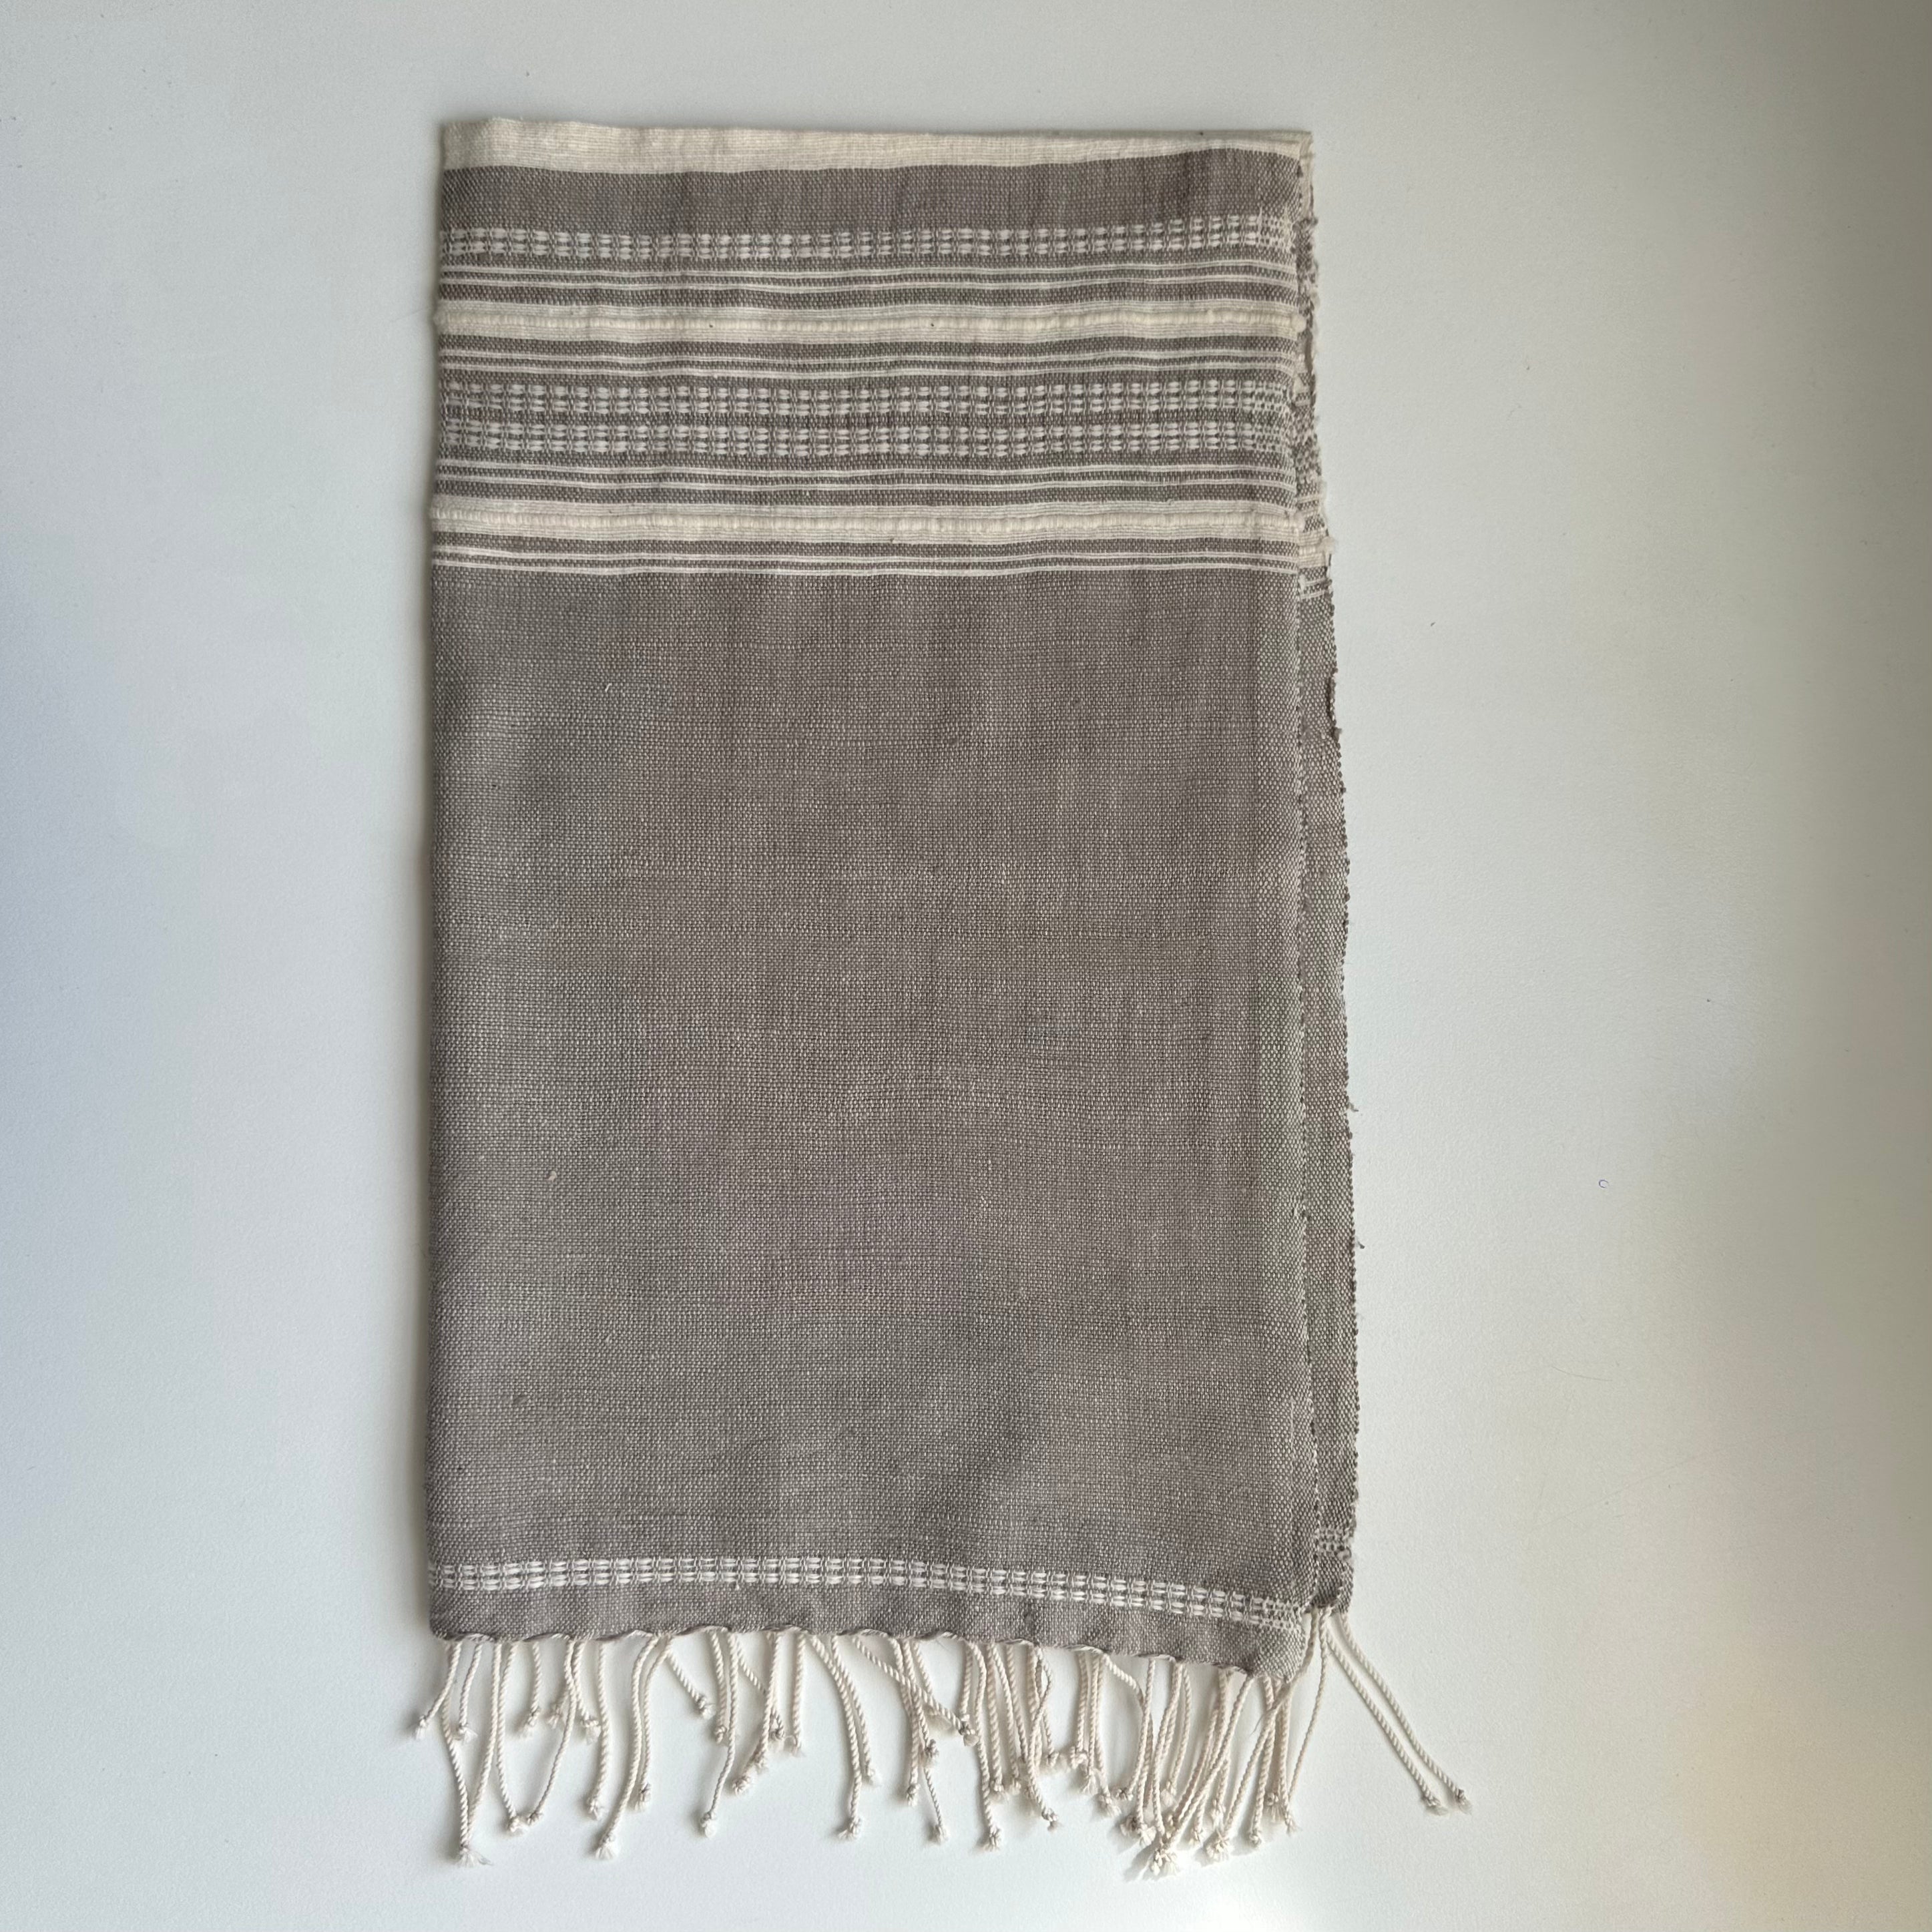 Ivory and Stone colored hand Ethiopian cotton hand towel